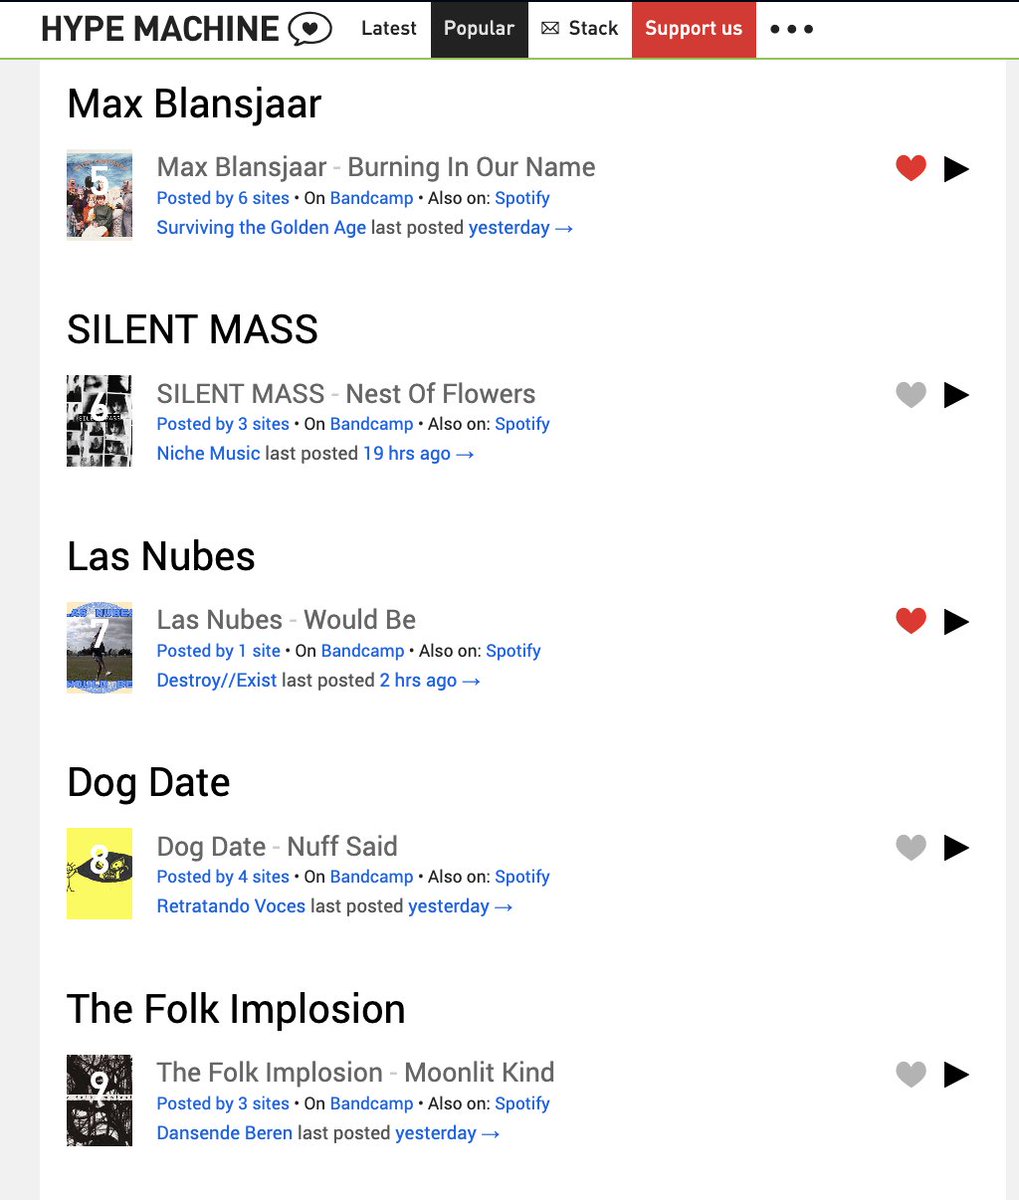 Both @mblansjaarmusic and @LasNubesBand in the @hypem 'Most Posted Artists' chart today <3 Las Nubes: hypem.com/track/36ct7 Max Blansjaar: hypem.com/track/36bk9 Huge thanks to @godisinthetv @destroyexist @StGABlog @starttrack_com @VSmallFlames and @ZoneNights <3